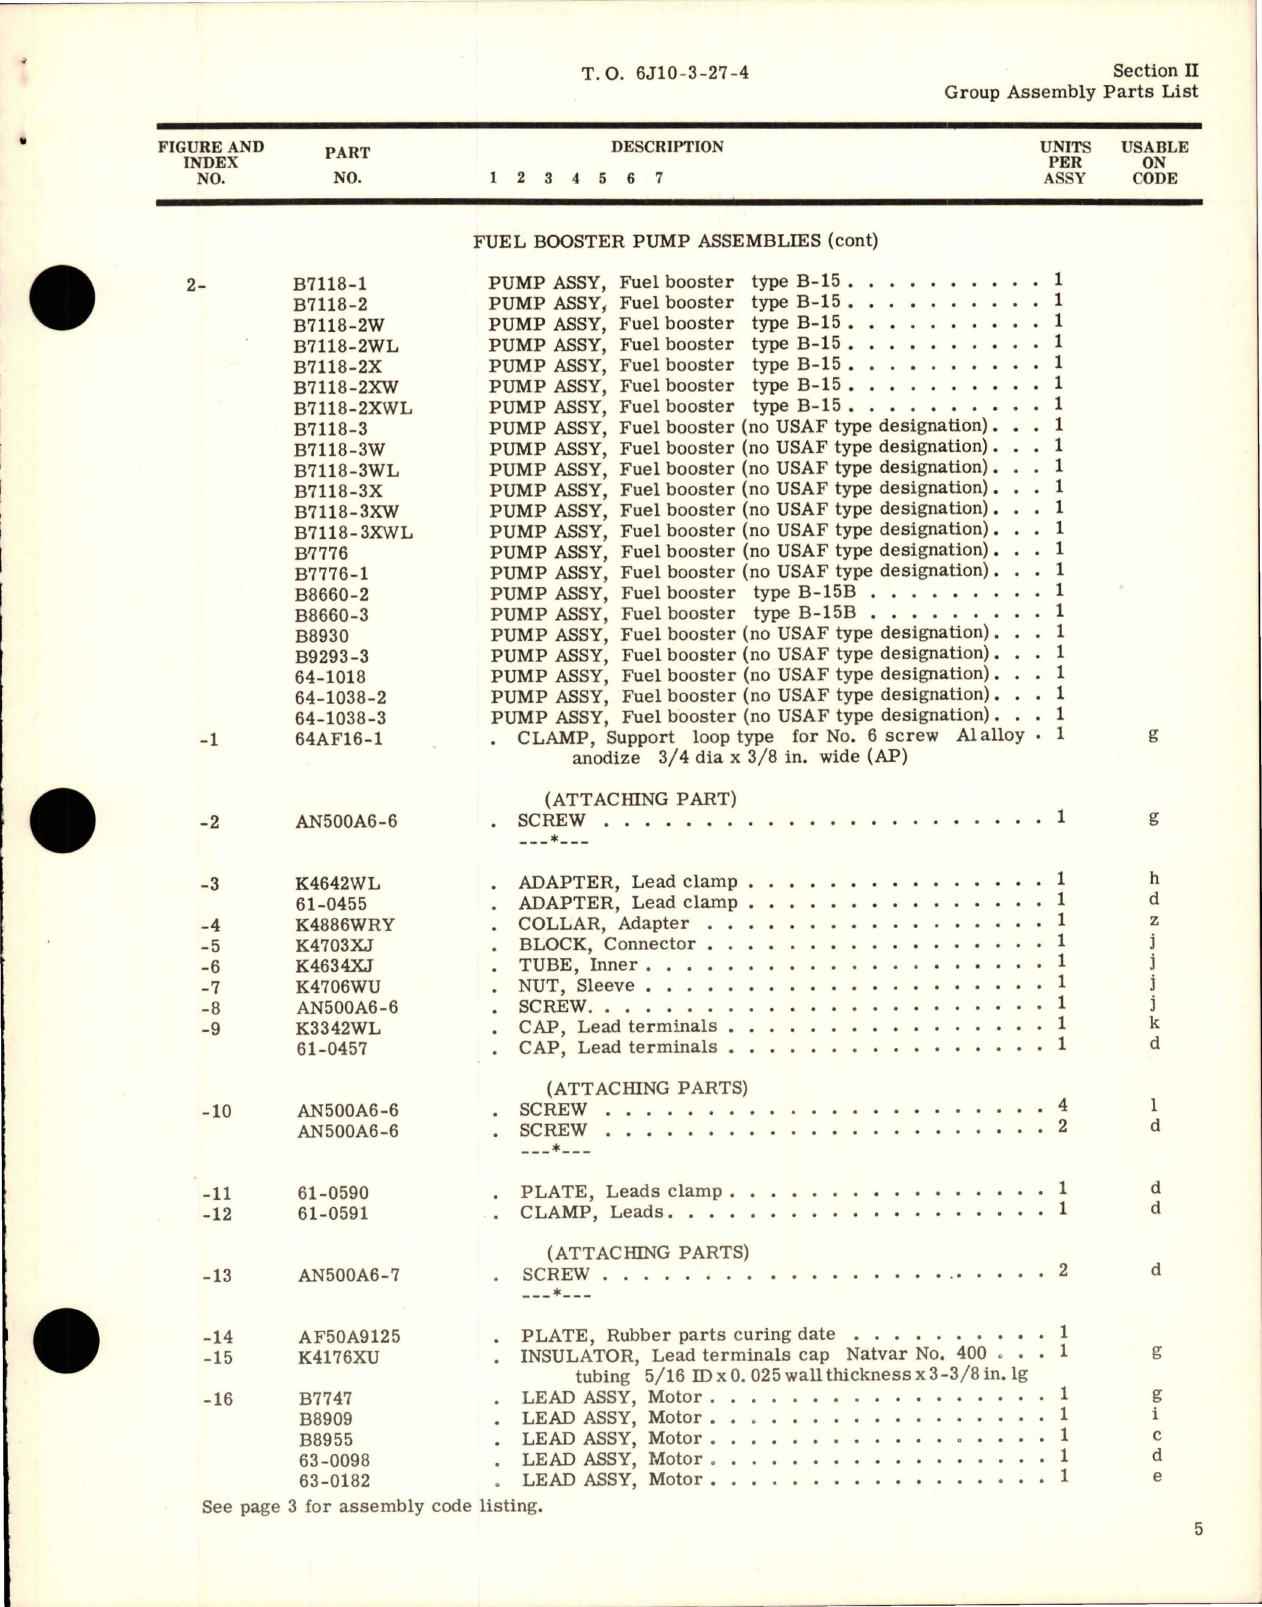 Sample page 7 from AirCorps Library document: Illustrated Parts Breakdown for Fuel Booster Pumps